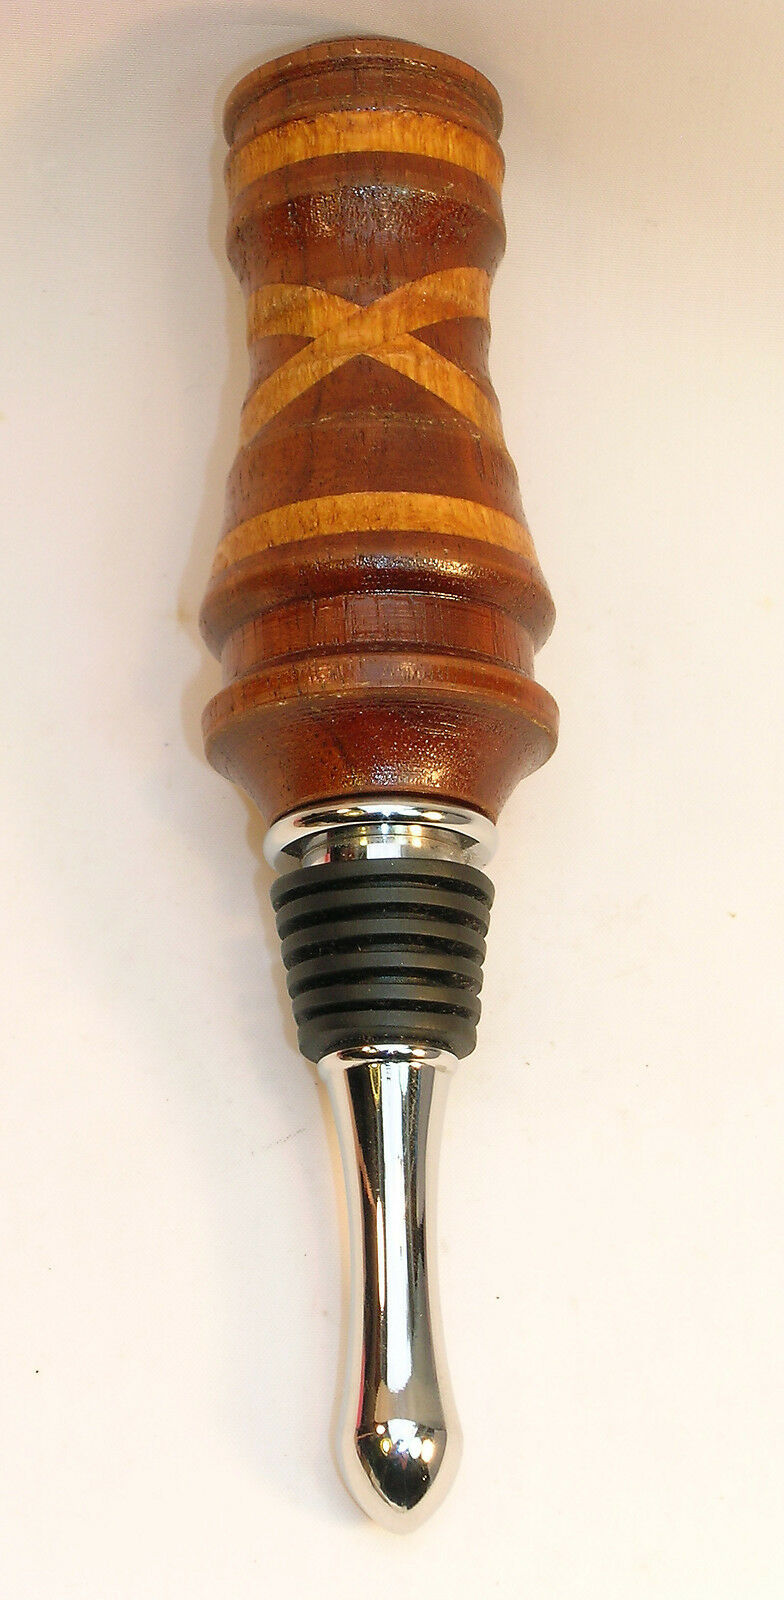 New Hand Crafted Oak & Mahogany Wood Bottle Stopper Great Gift  Wine OOAK - $18.99